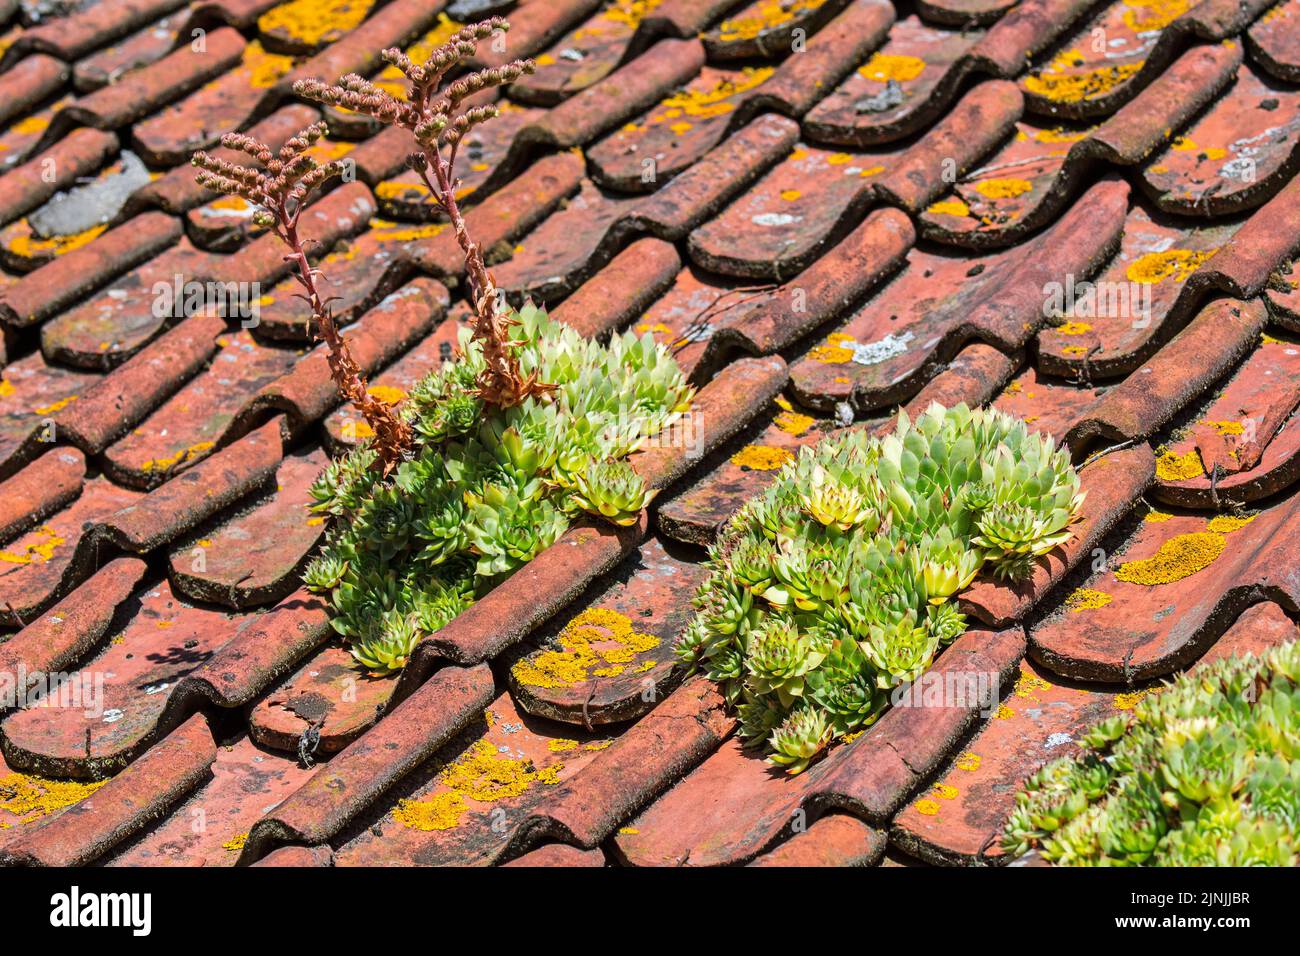 Common houseleek (Sempervivum tectorum) growing on old house roof with red roofing tiles, traditionally to protect buildings against lightning strikes Stock Photo